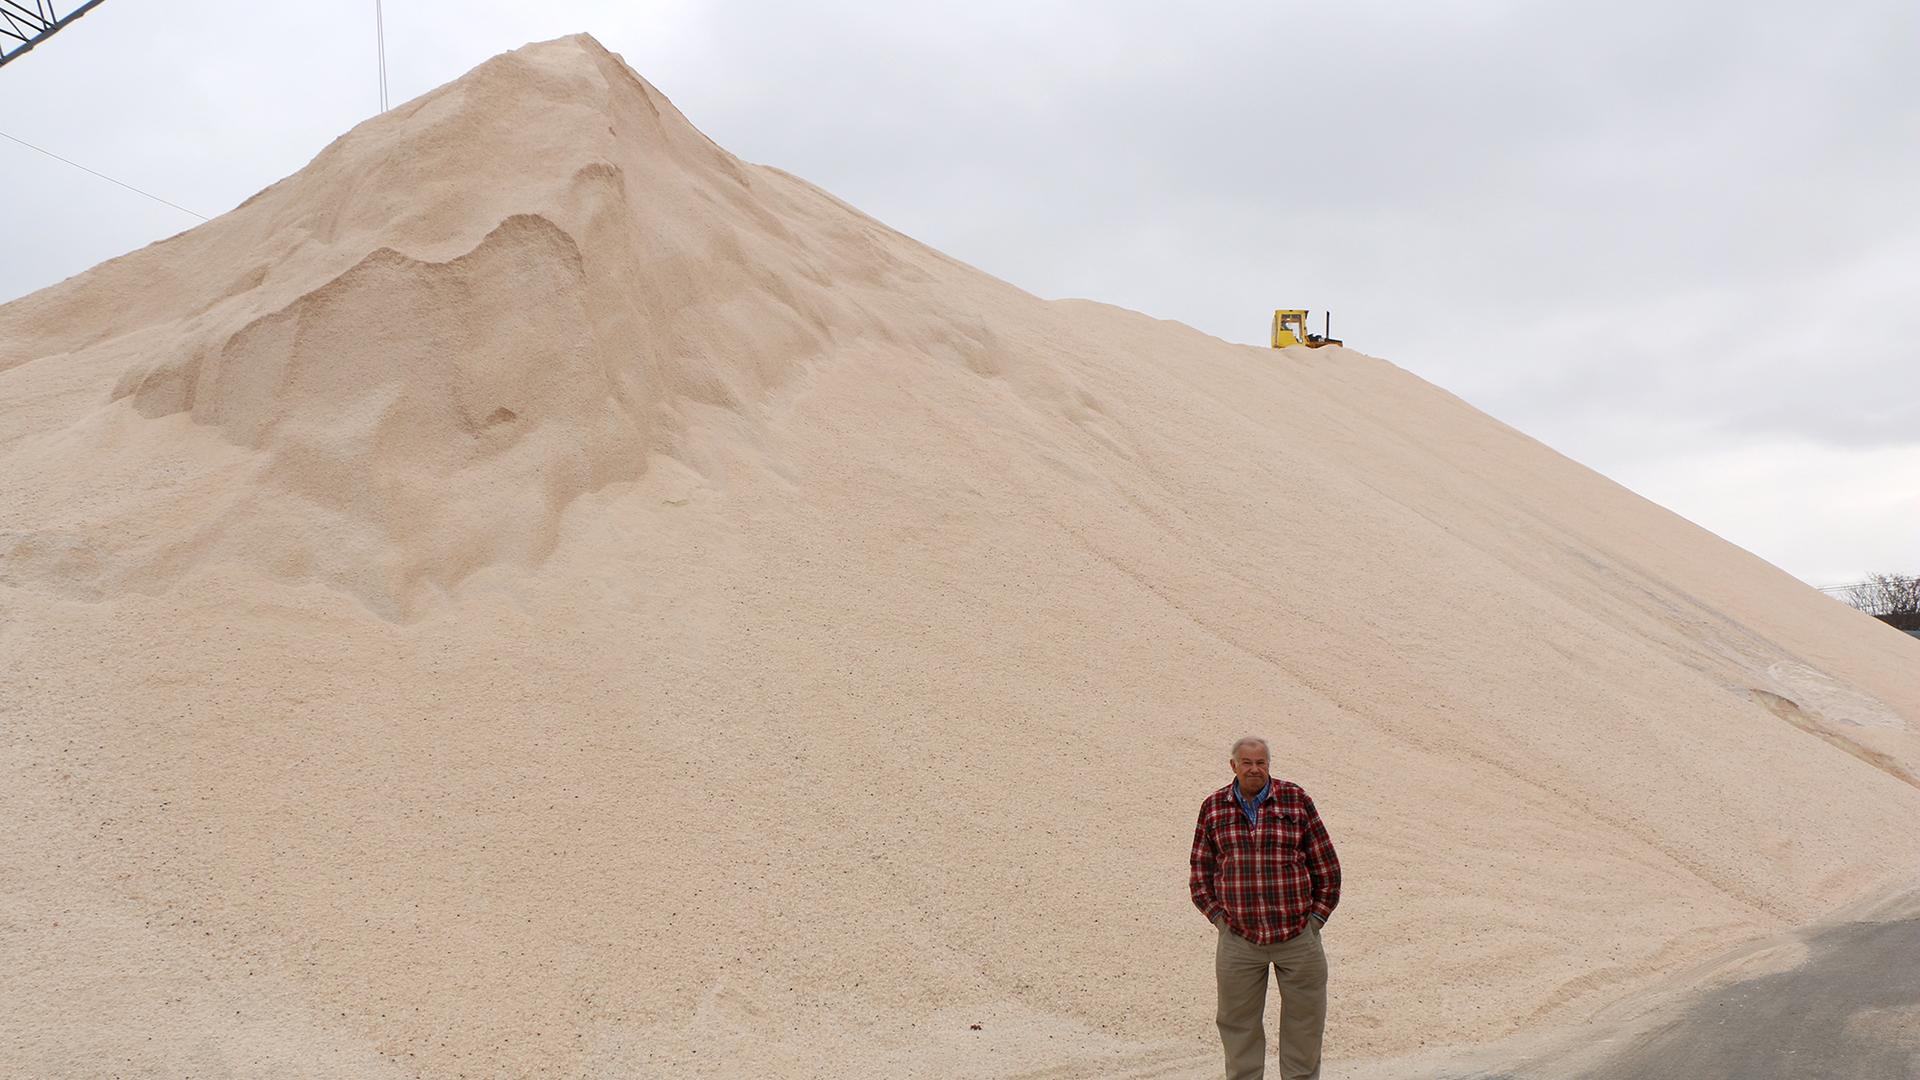 Terminal manager Paul Lamb stands before one of the piles of salt at Eastern Minerals, Inc. in Chelsea, Massachusetts. They bring in hundreds of thousands of pounds of salt every year.